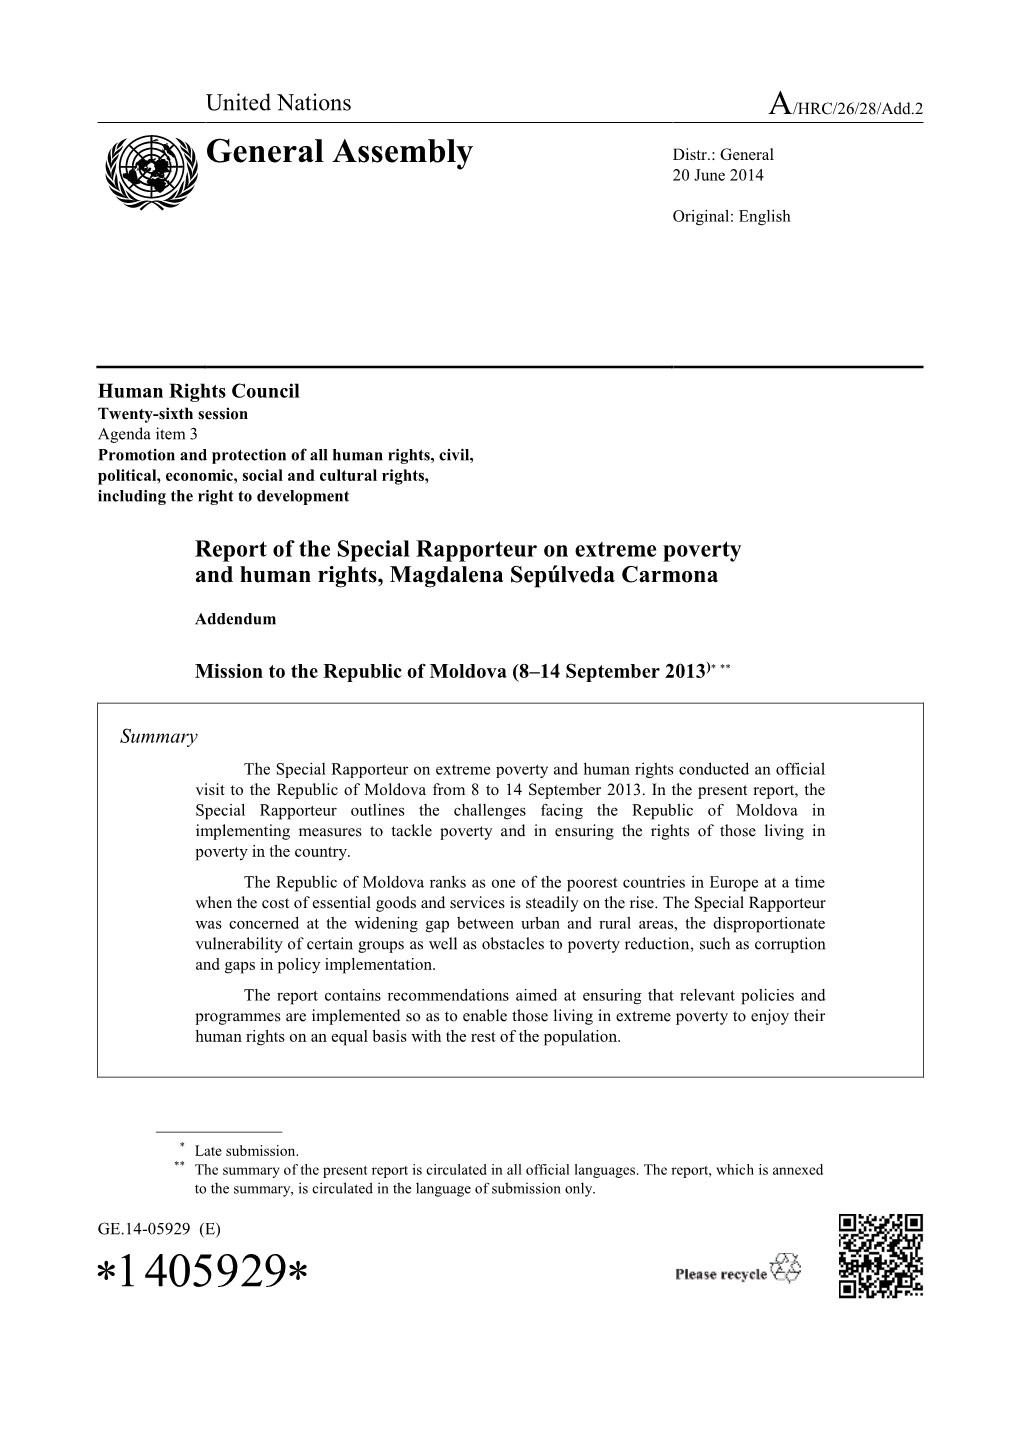 Report of the Special Rapporteur on Extreme Poverty and Human Rights, Magdalena Sepúlveda Carmona